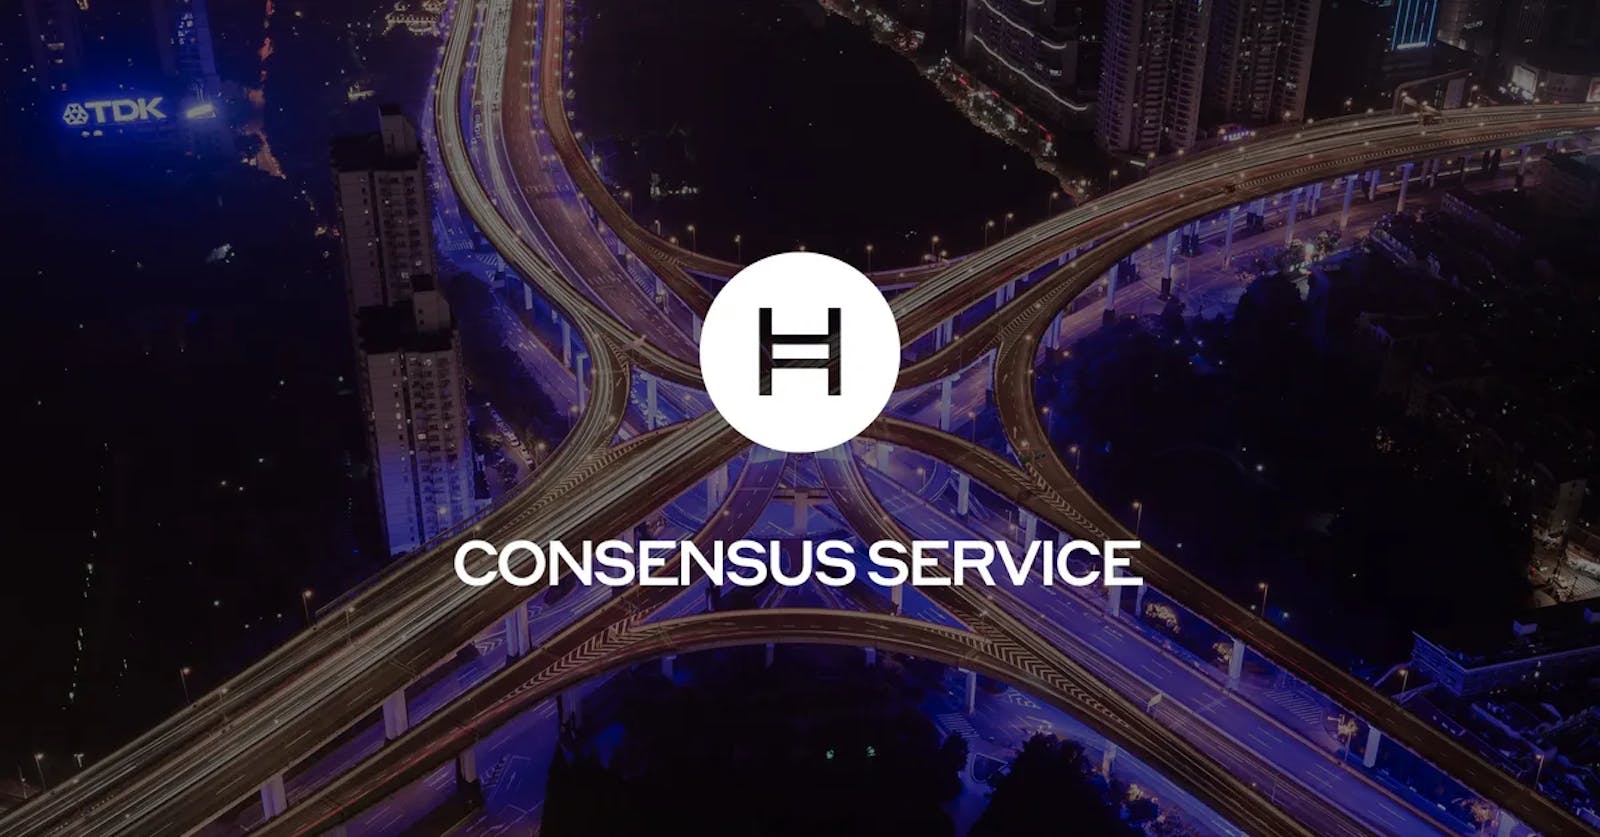 How to Create Consensus Topics and Publish Messages to the Hedera Network Using Hedera Consensus Service (HCS)